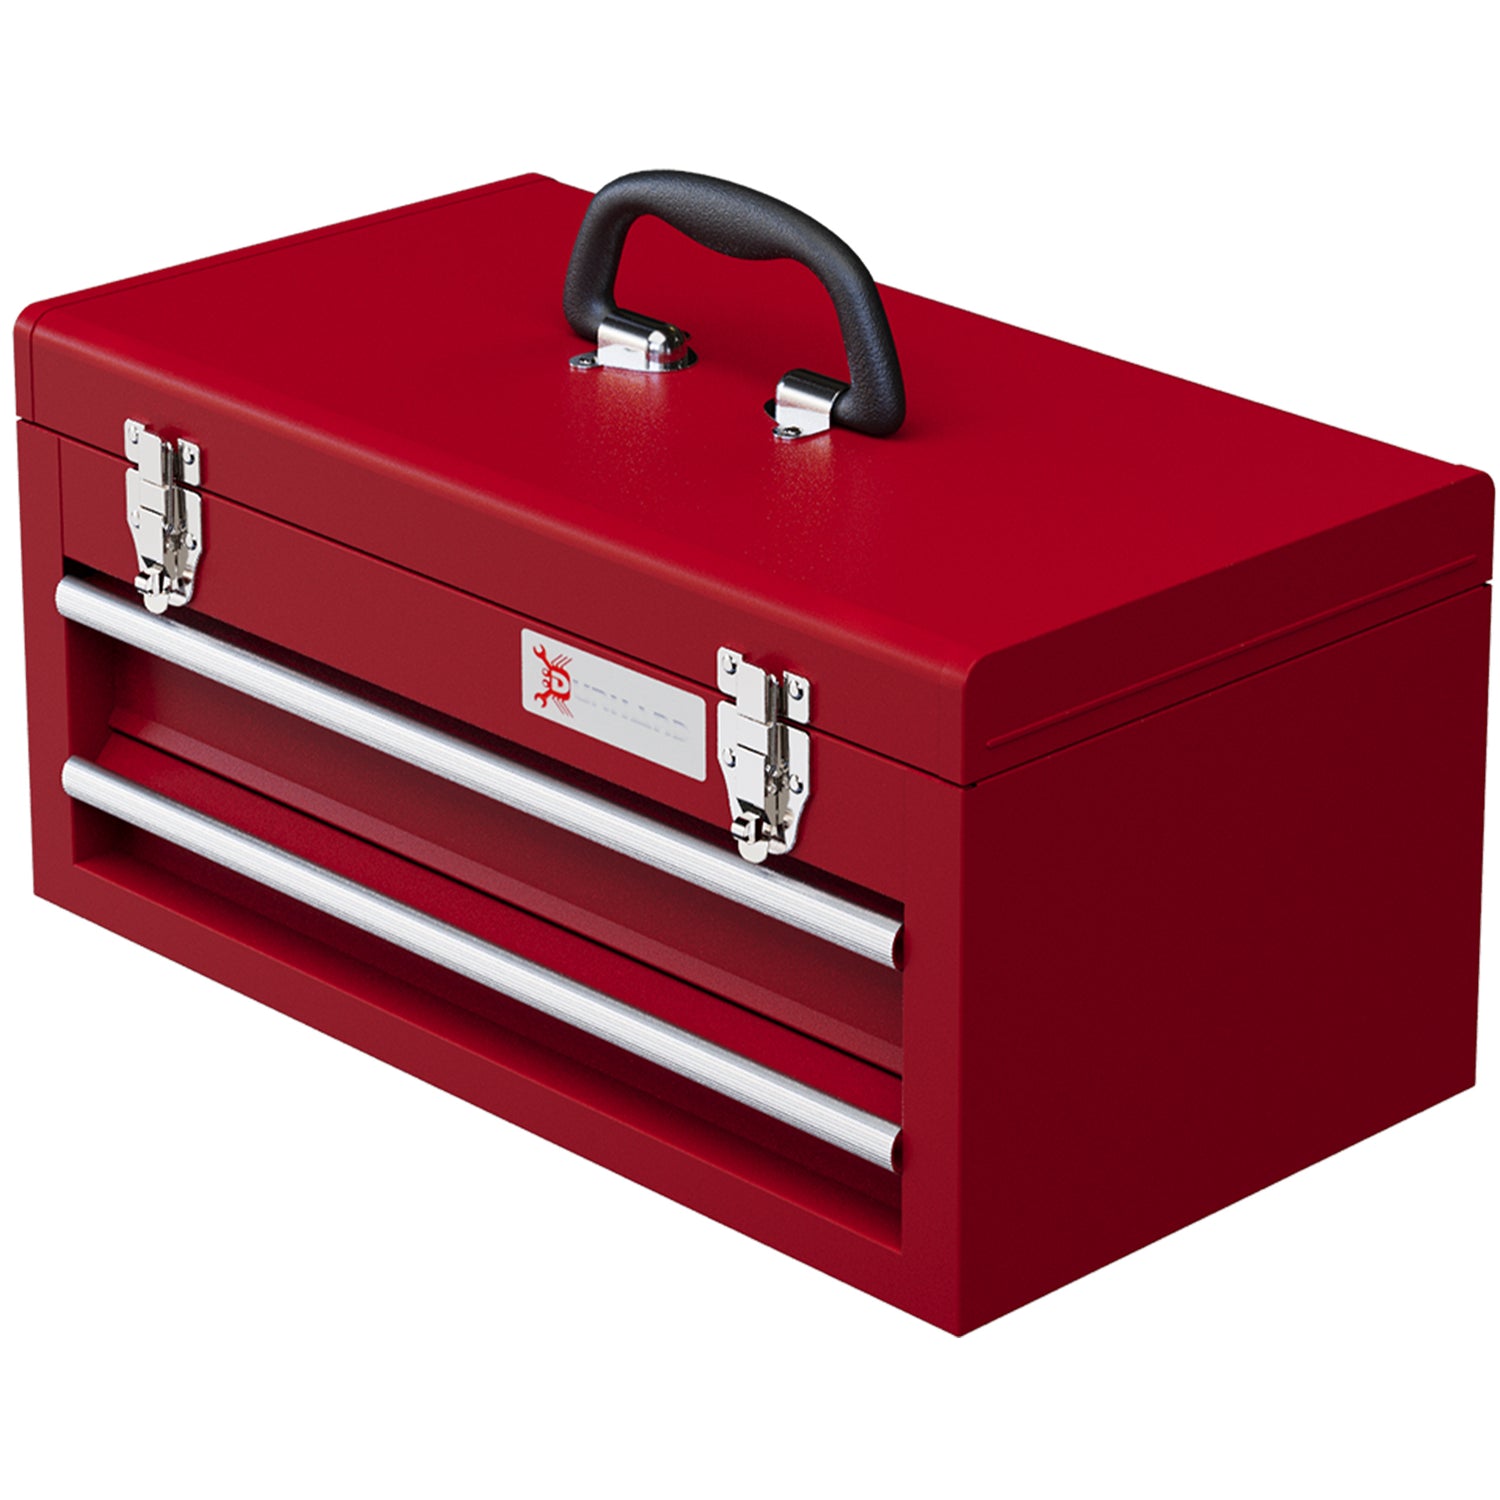 DURHAND Metal Tool Box Portable Tool Chest Organizer With Drawers